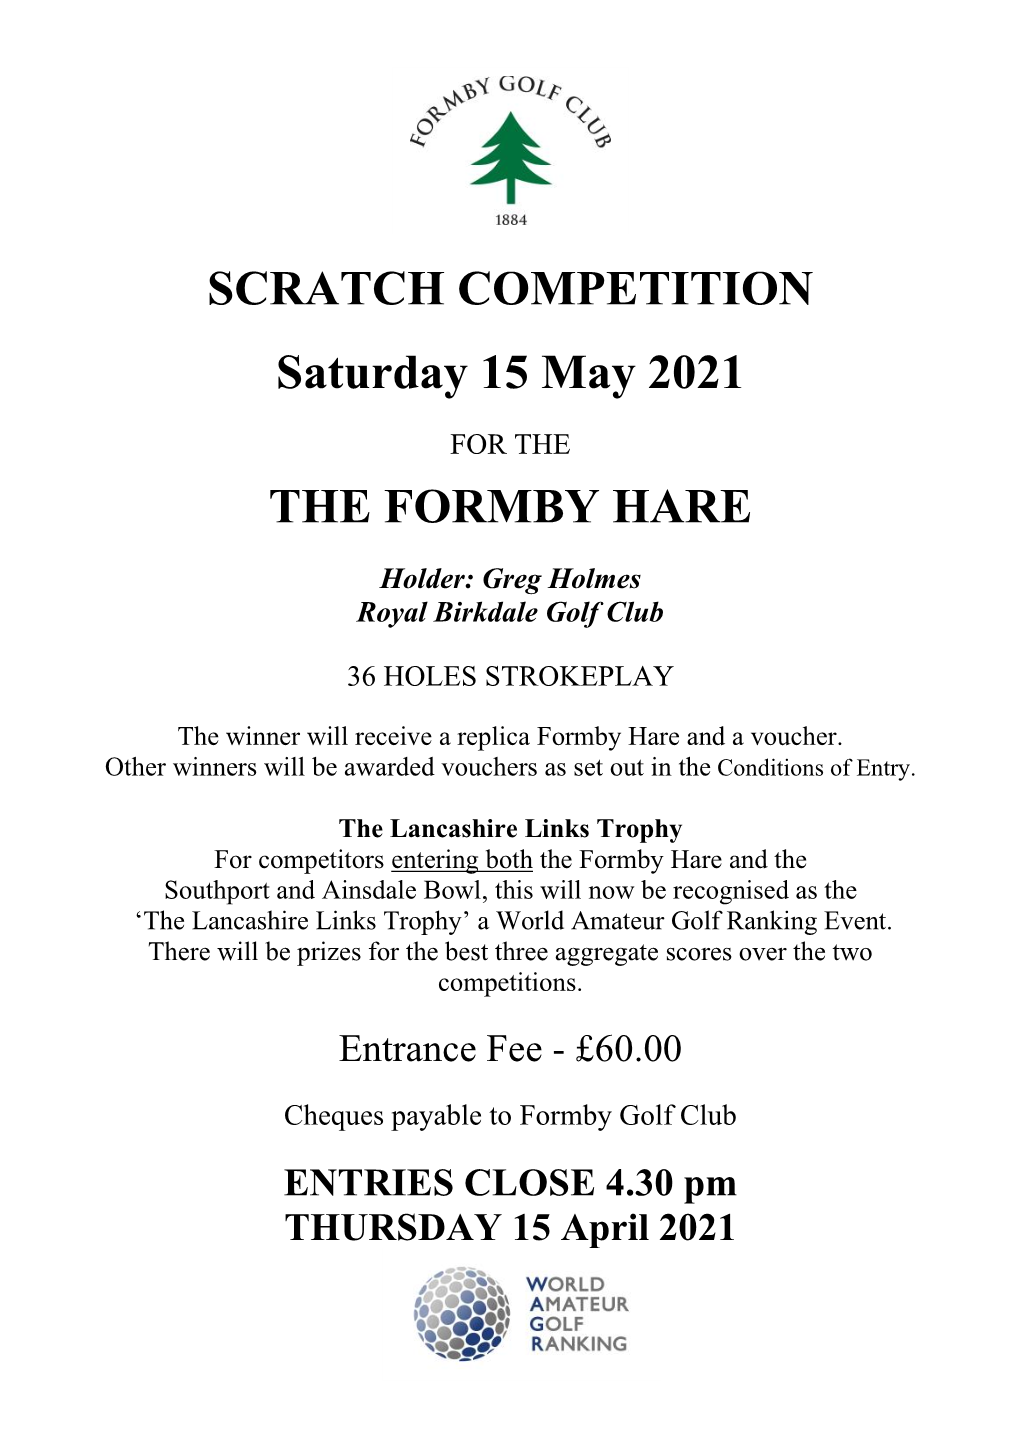 Formby Hare Entry Form 2021